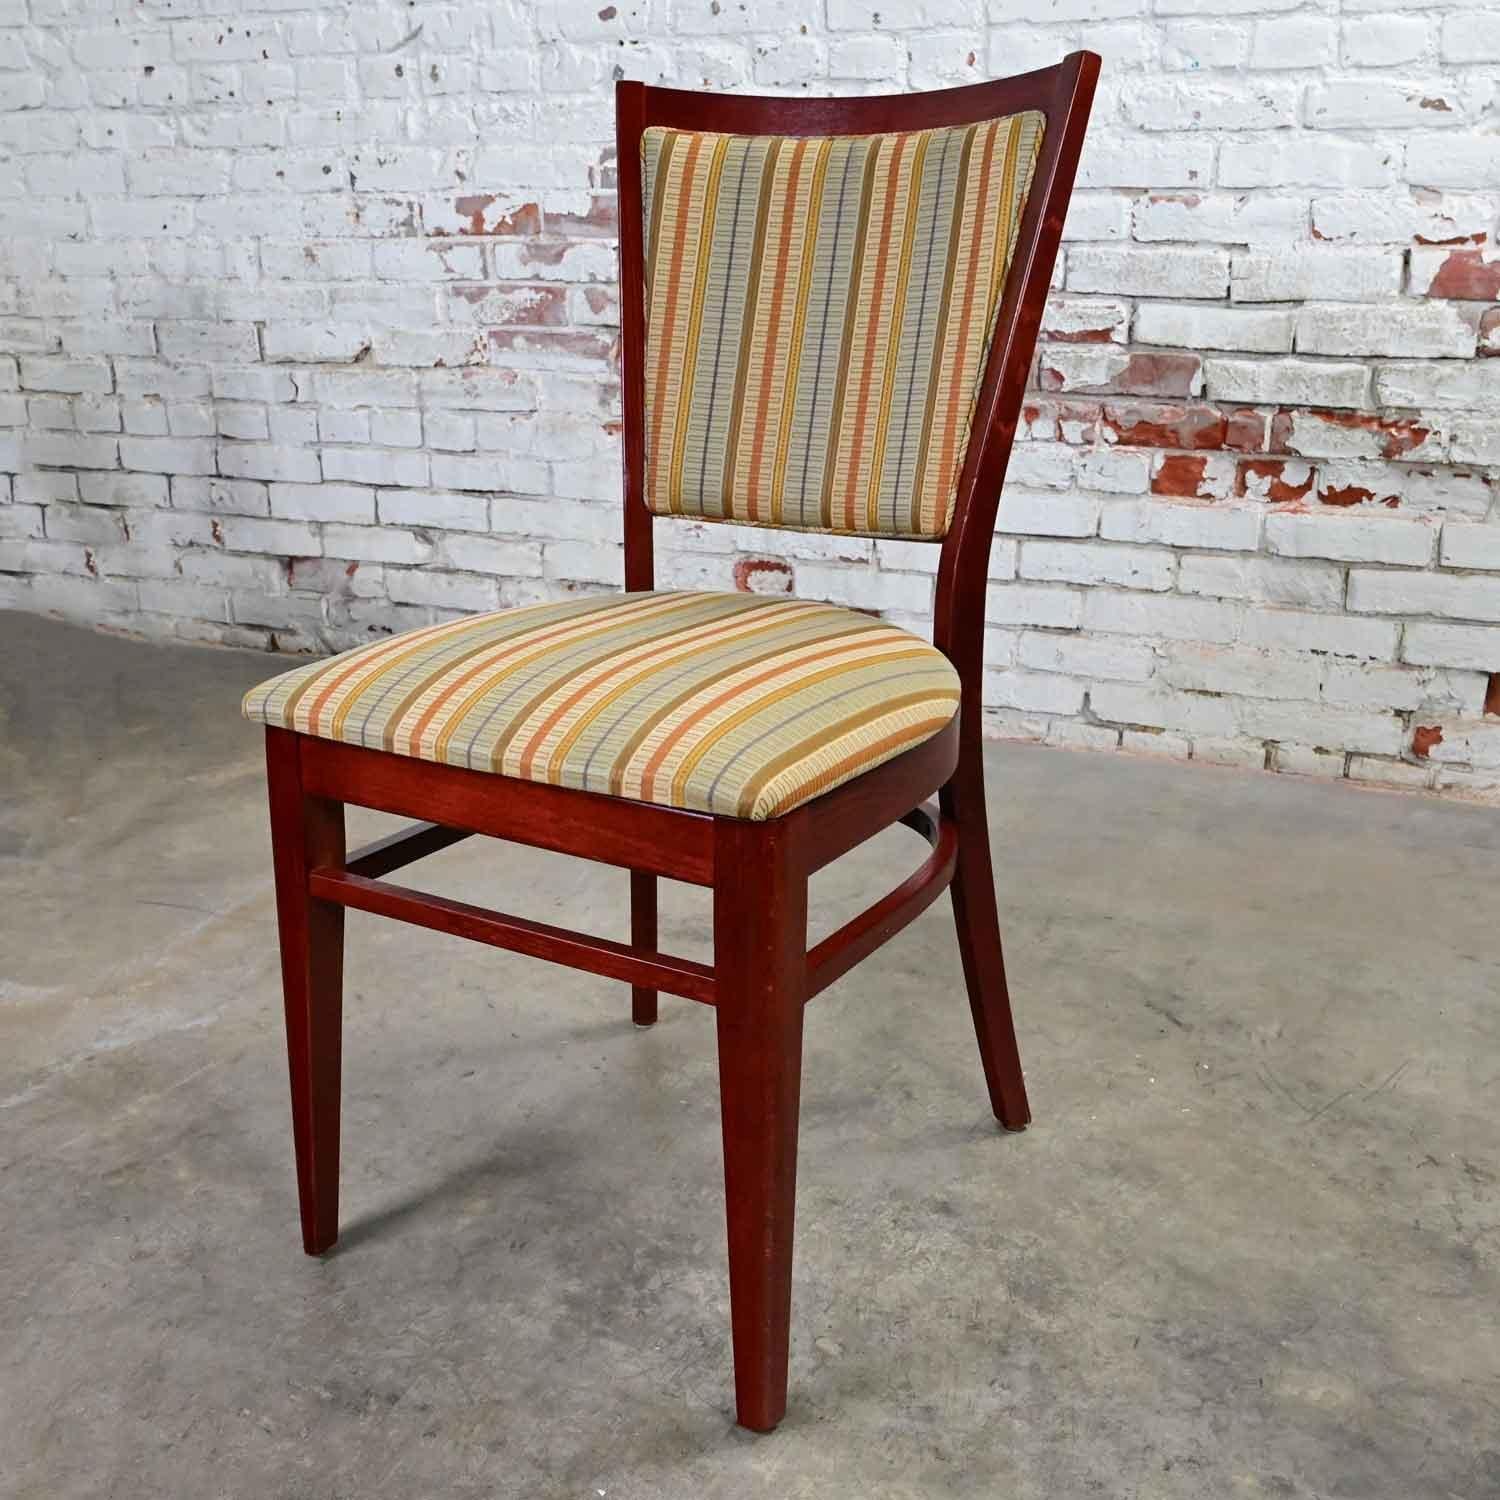 Awesome Traditional to Art Deco to Modern Grand Rapids Chair Company Variations Collection dining chairs 16 total, selling separately. Beautiful condition, keeping in mind that these are vintage and not new so will have signs of use and wear. They